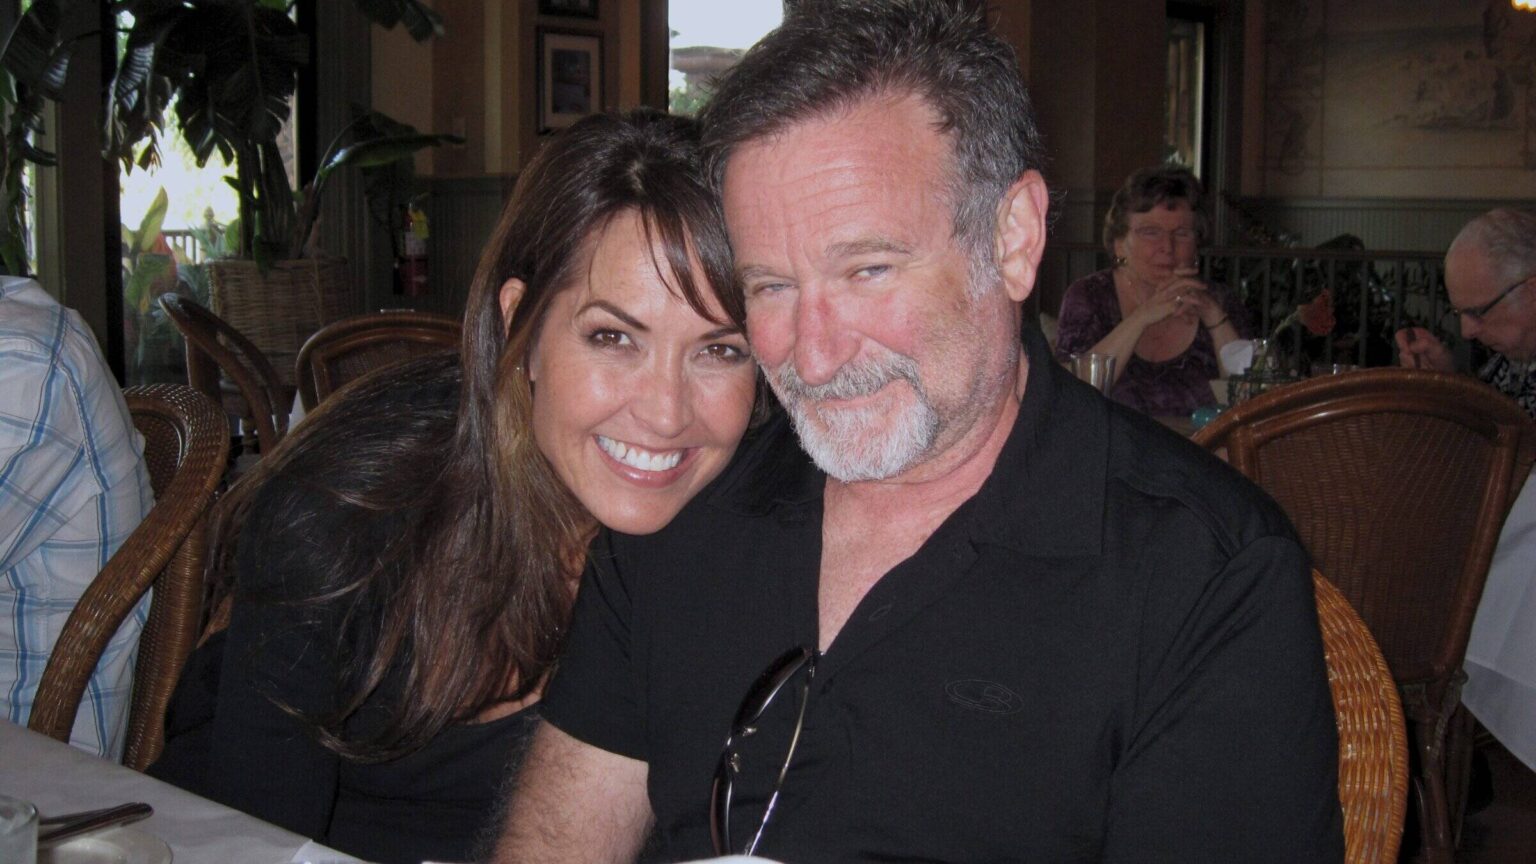 Susan Schneider Williams, spouse of Robin Williams, unveiled his struggle with LBD and tackled the misconceptions concerning his heartbreaking suicide.